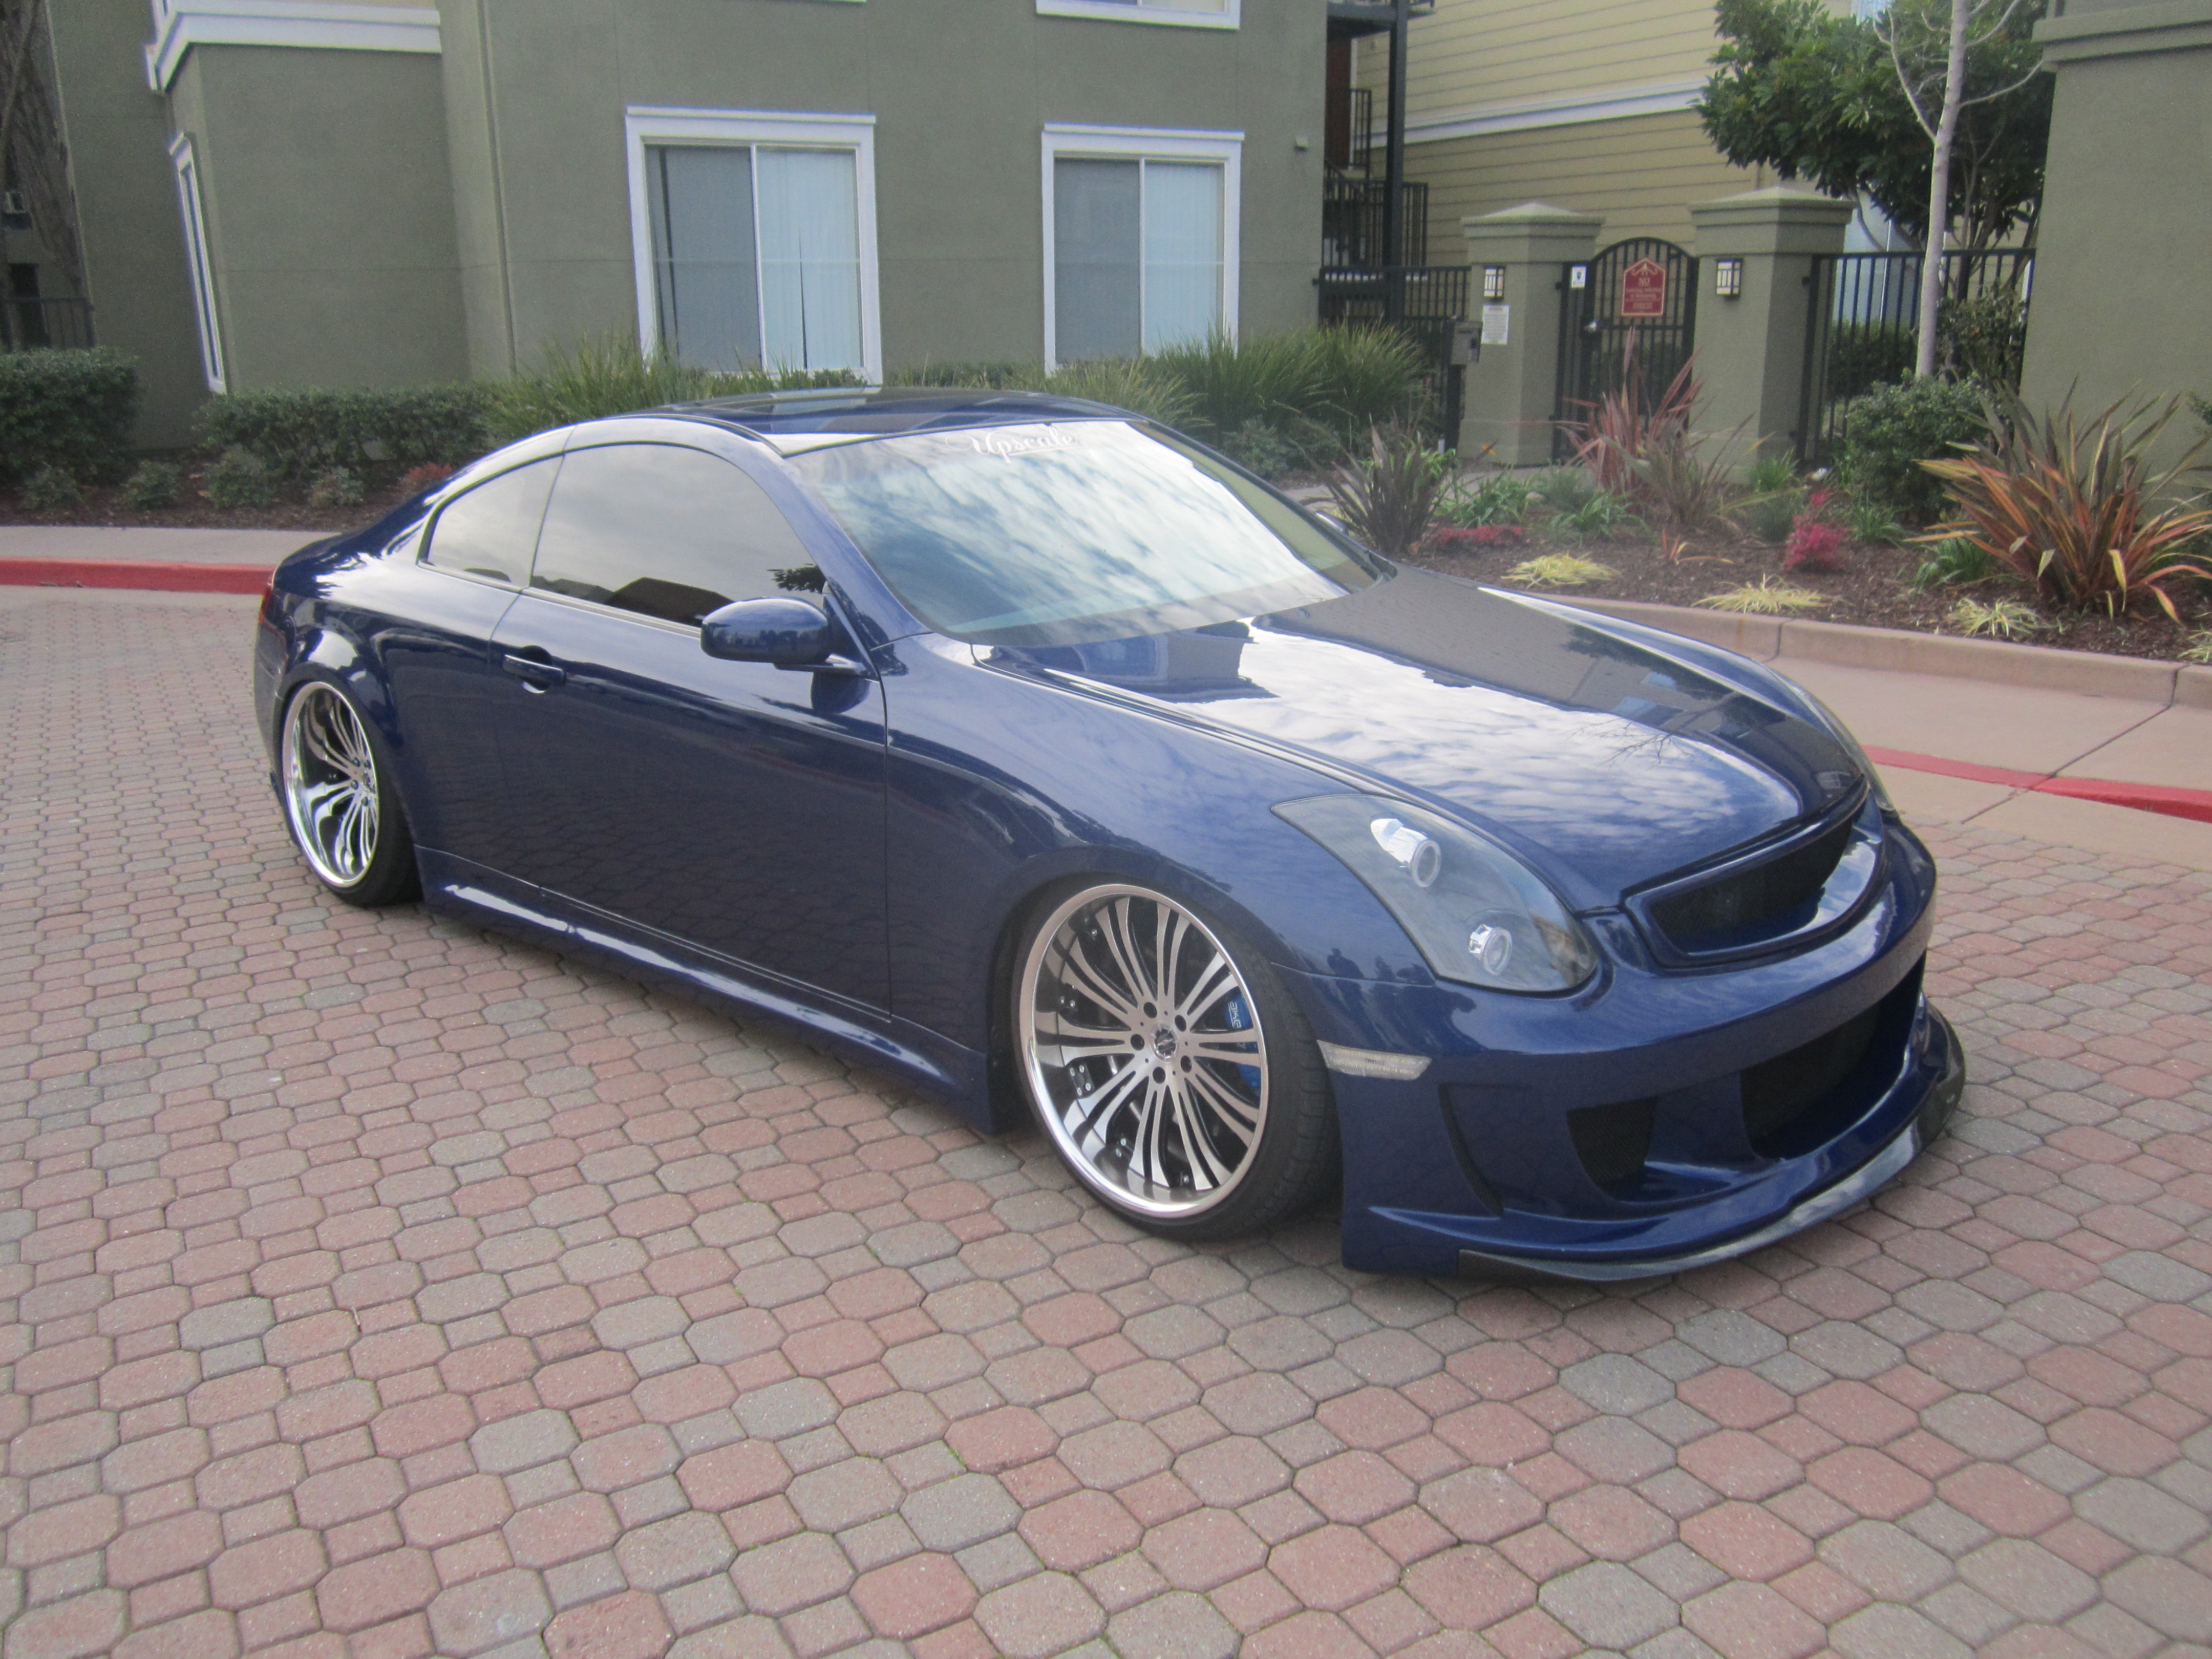 Troy M owns this beautiful airbagged G35 coupe with custom paint. 